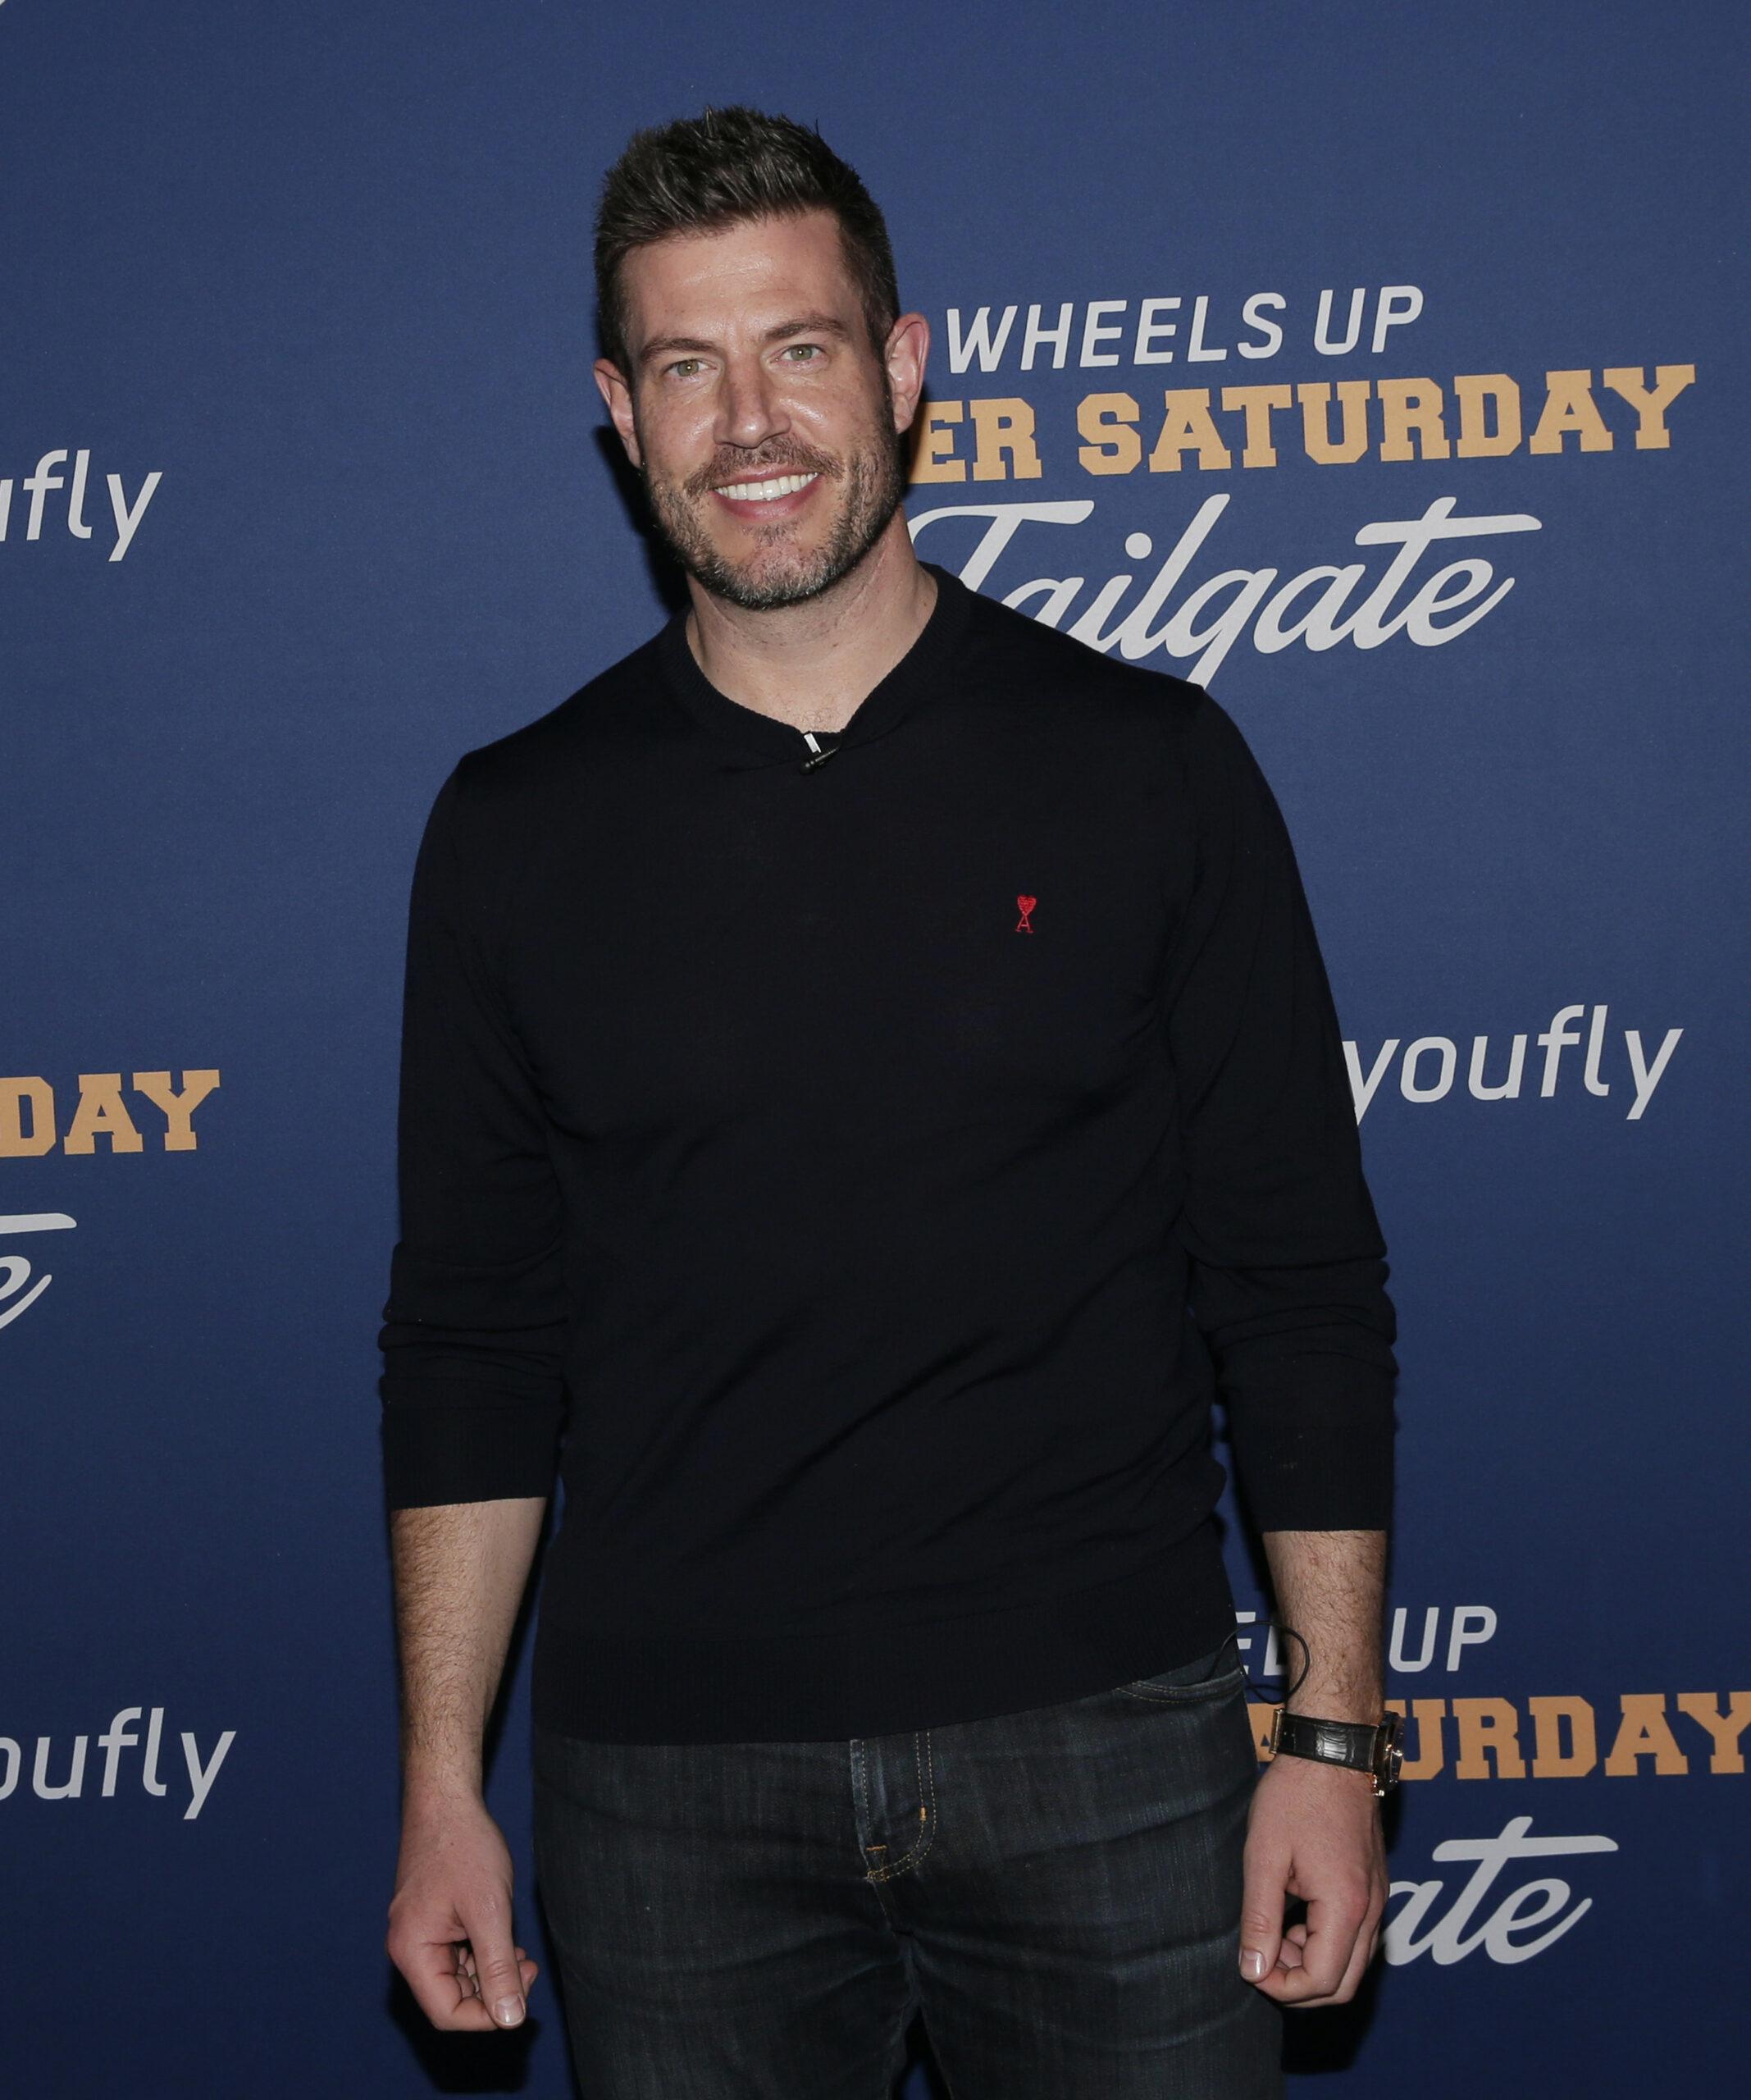 Jesse Palmer at the Wheels Up Super Saturday TaIigate on February 2, 2019 in Atlanta. 